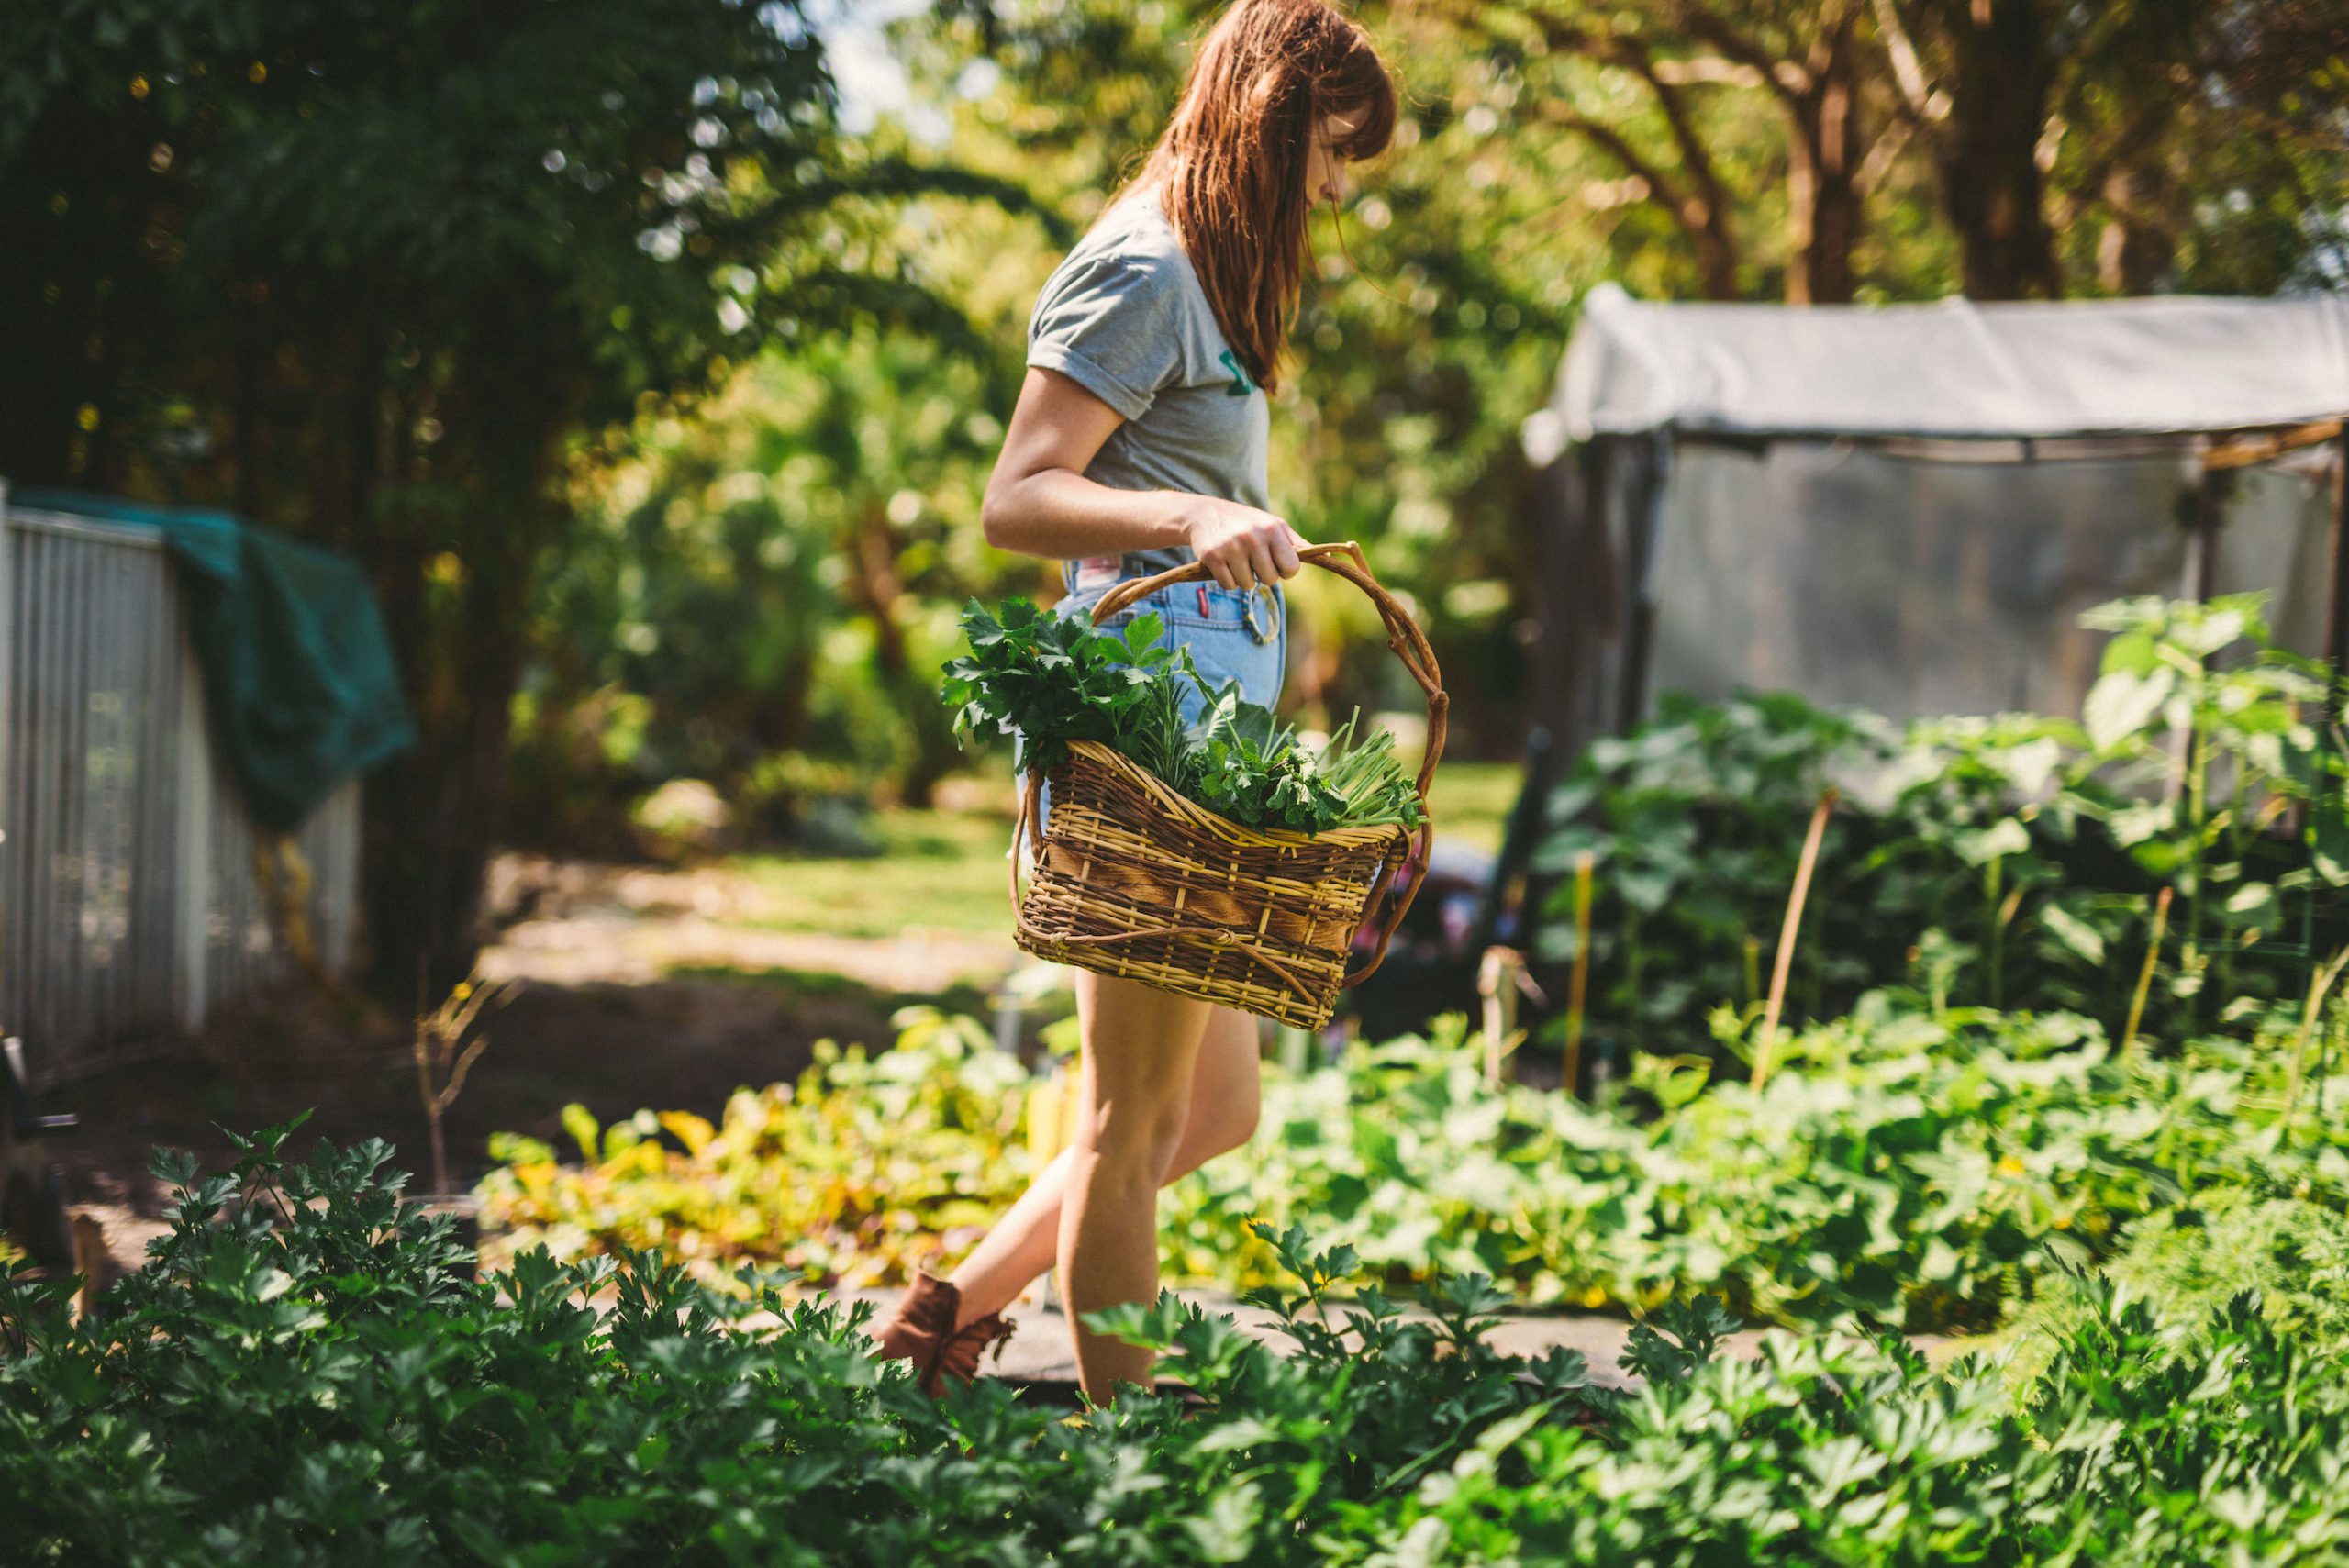 Fresh First Website Header Side profile of a woman with reddish brown hair walking through a garden holding a basket filled with produce